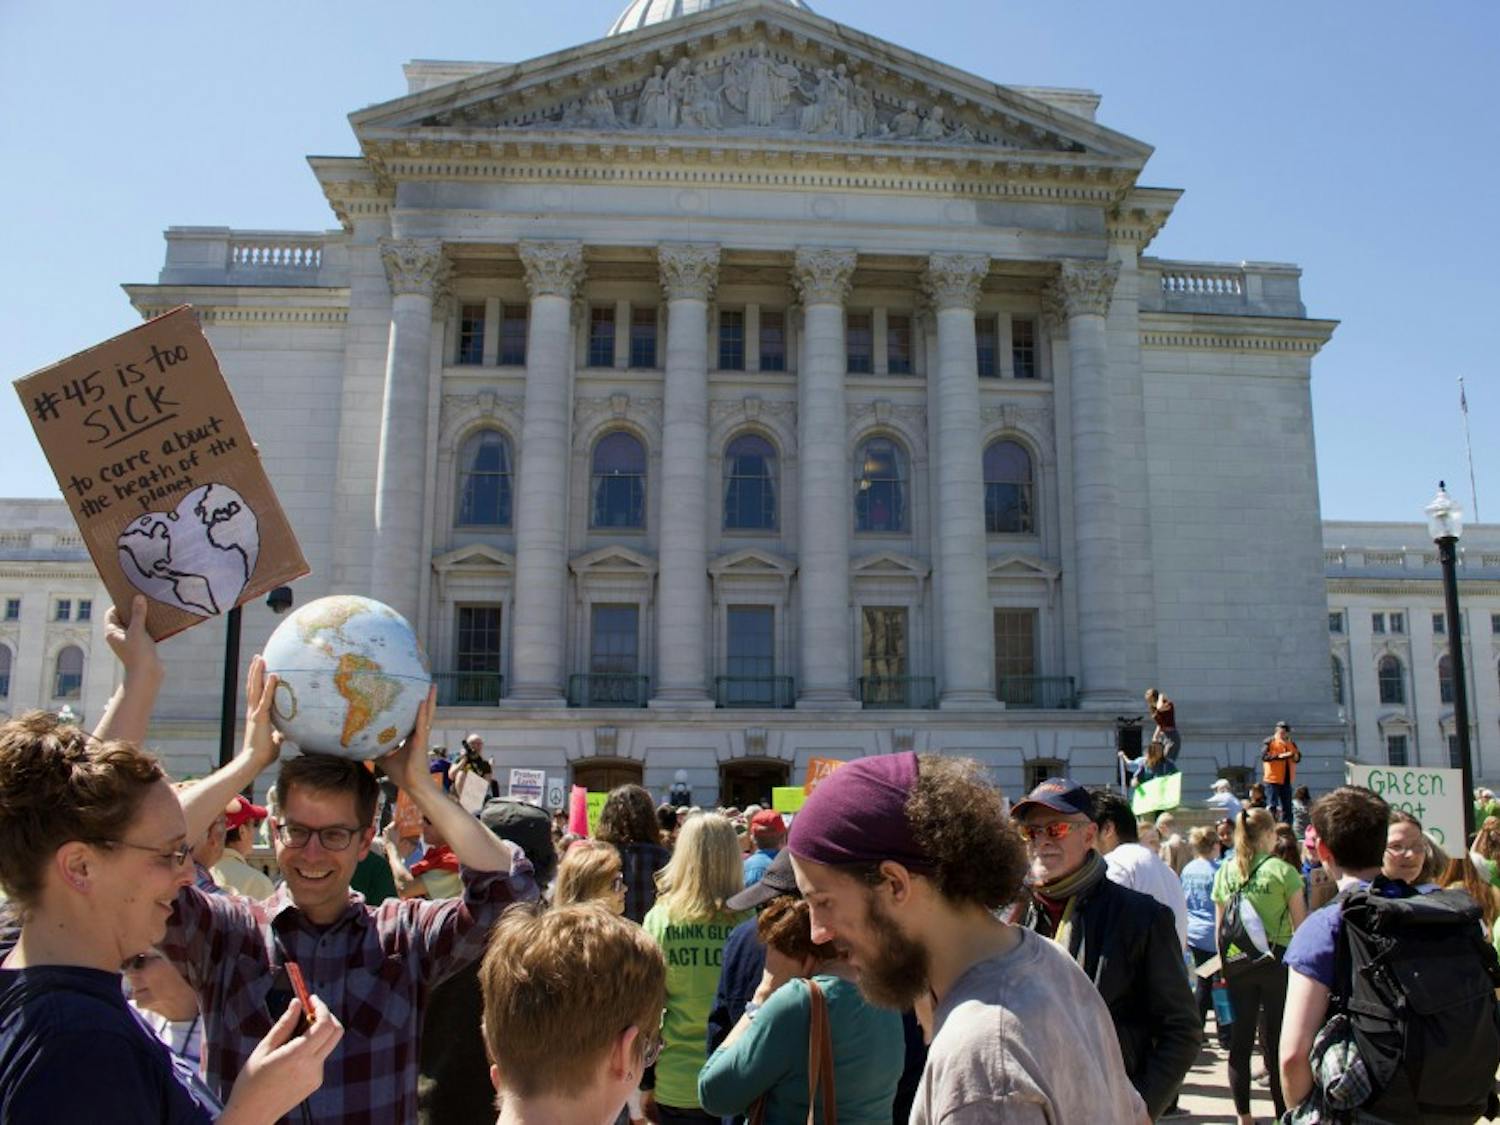  Thousands in Madison spent Earth Day marching from the state Capitol to Madison Gas and Electric, as part of an international movement to advocate for climate science and environmental protections.